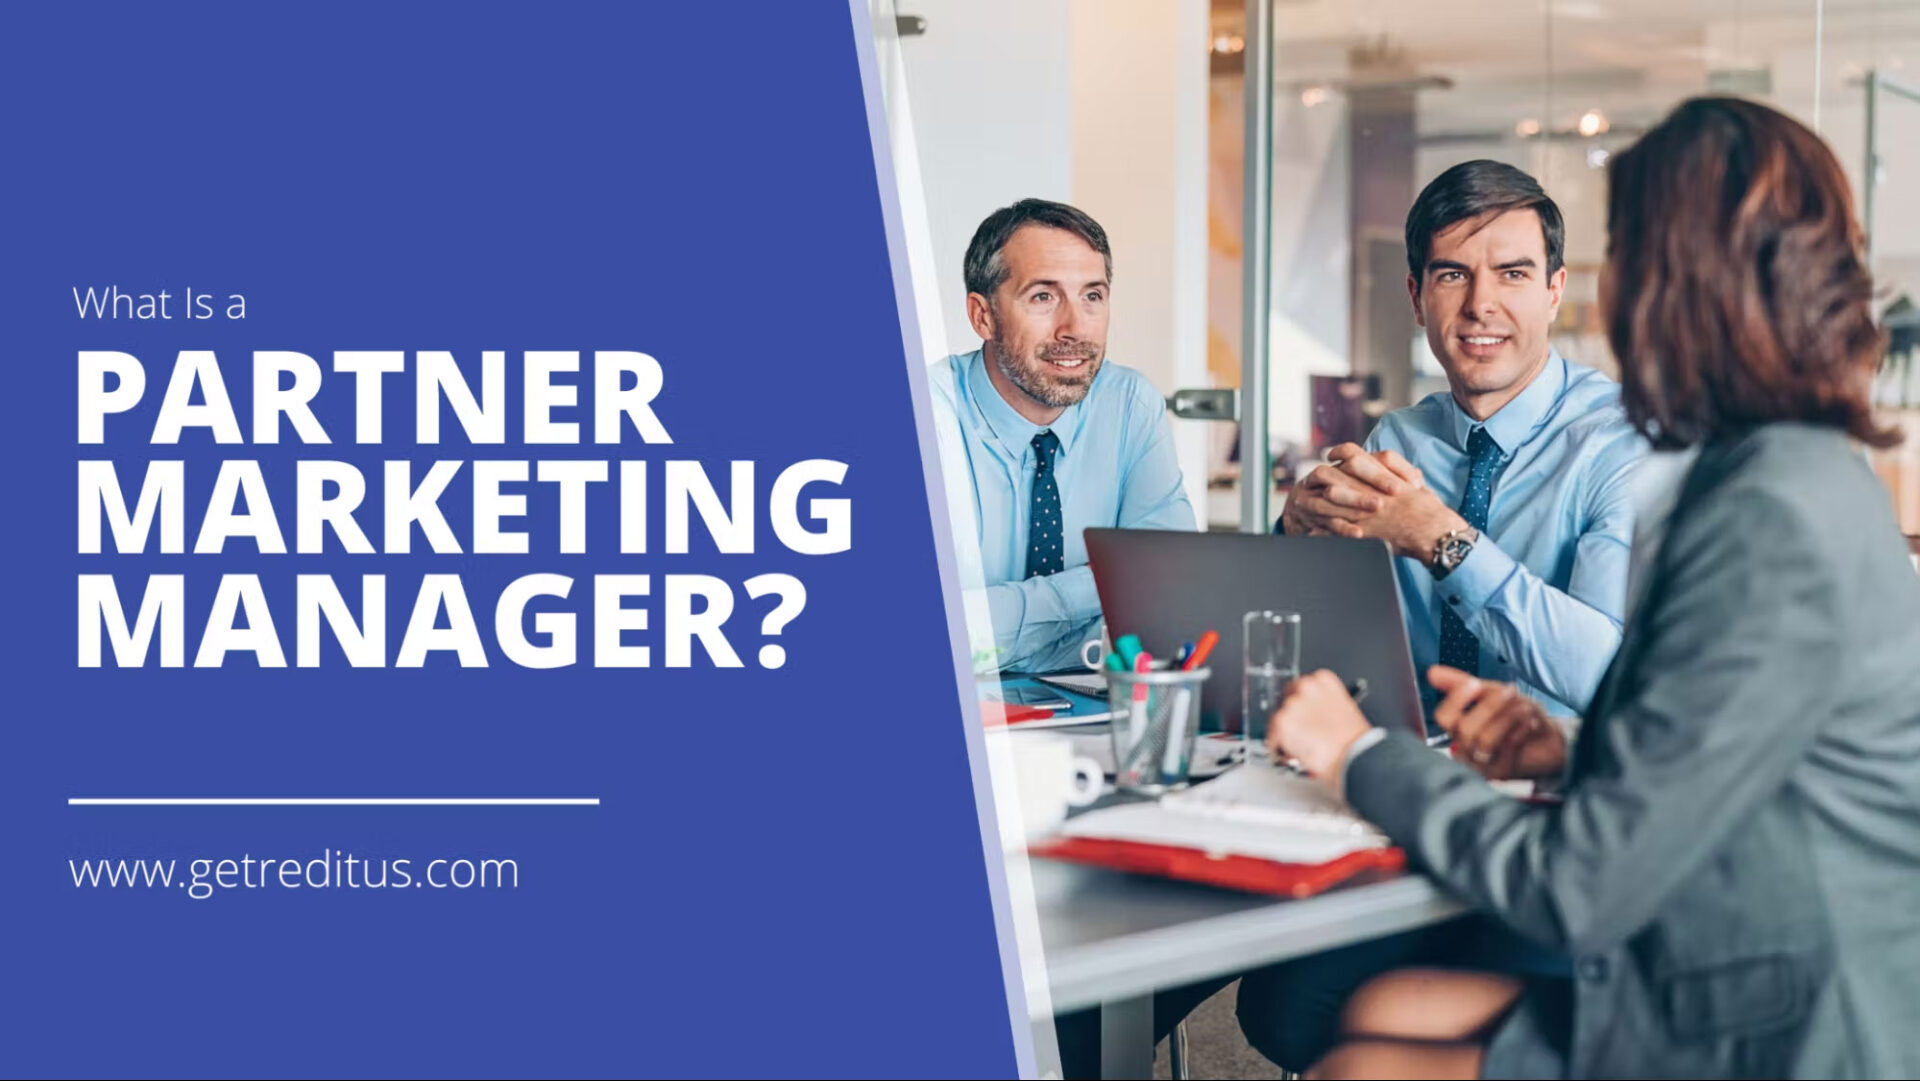 What Is a Partner Marketing Manager? Definition, Skills, and more.